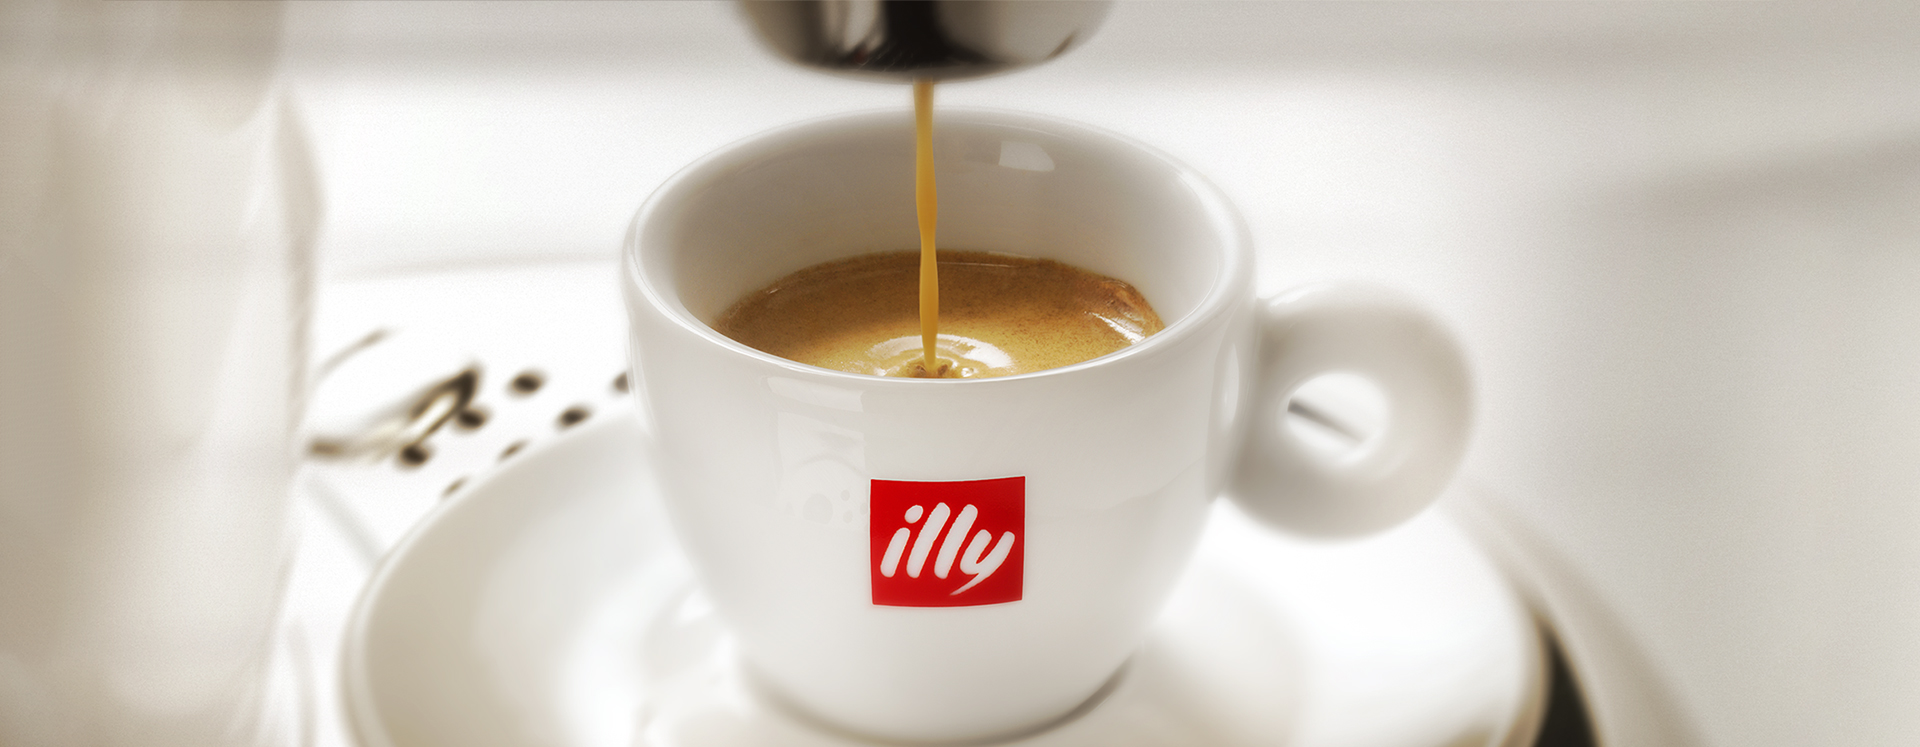 How To Make Espresso At Home The Perfect Coffee Illy